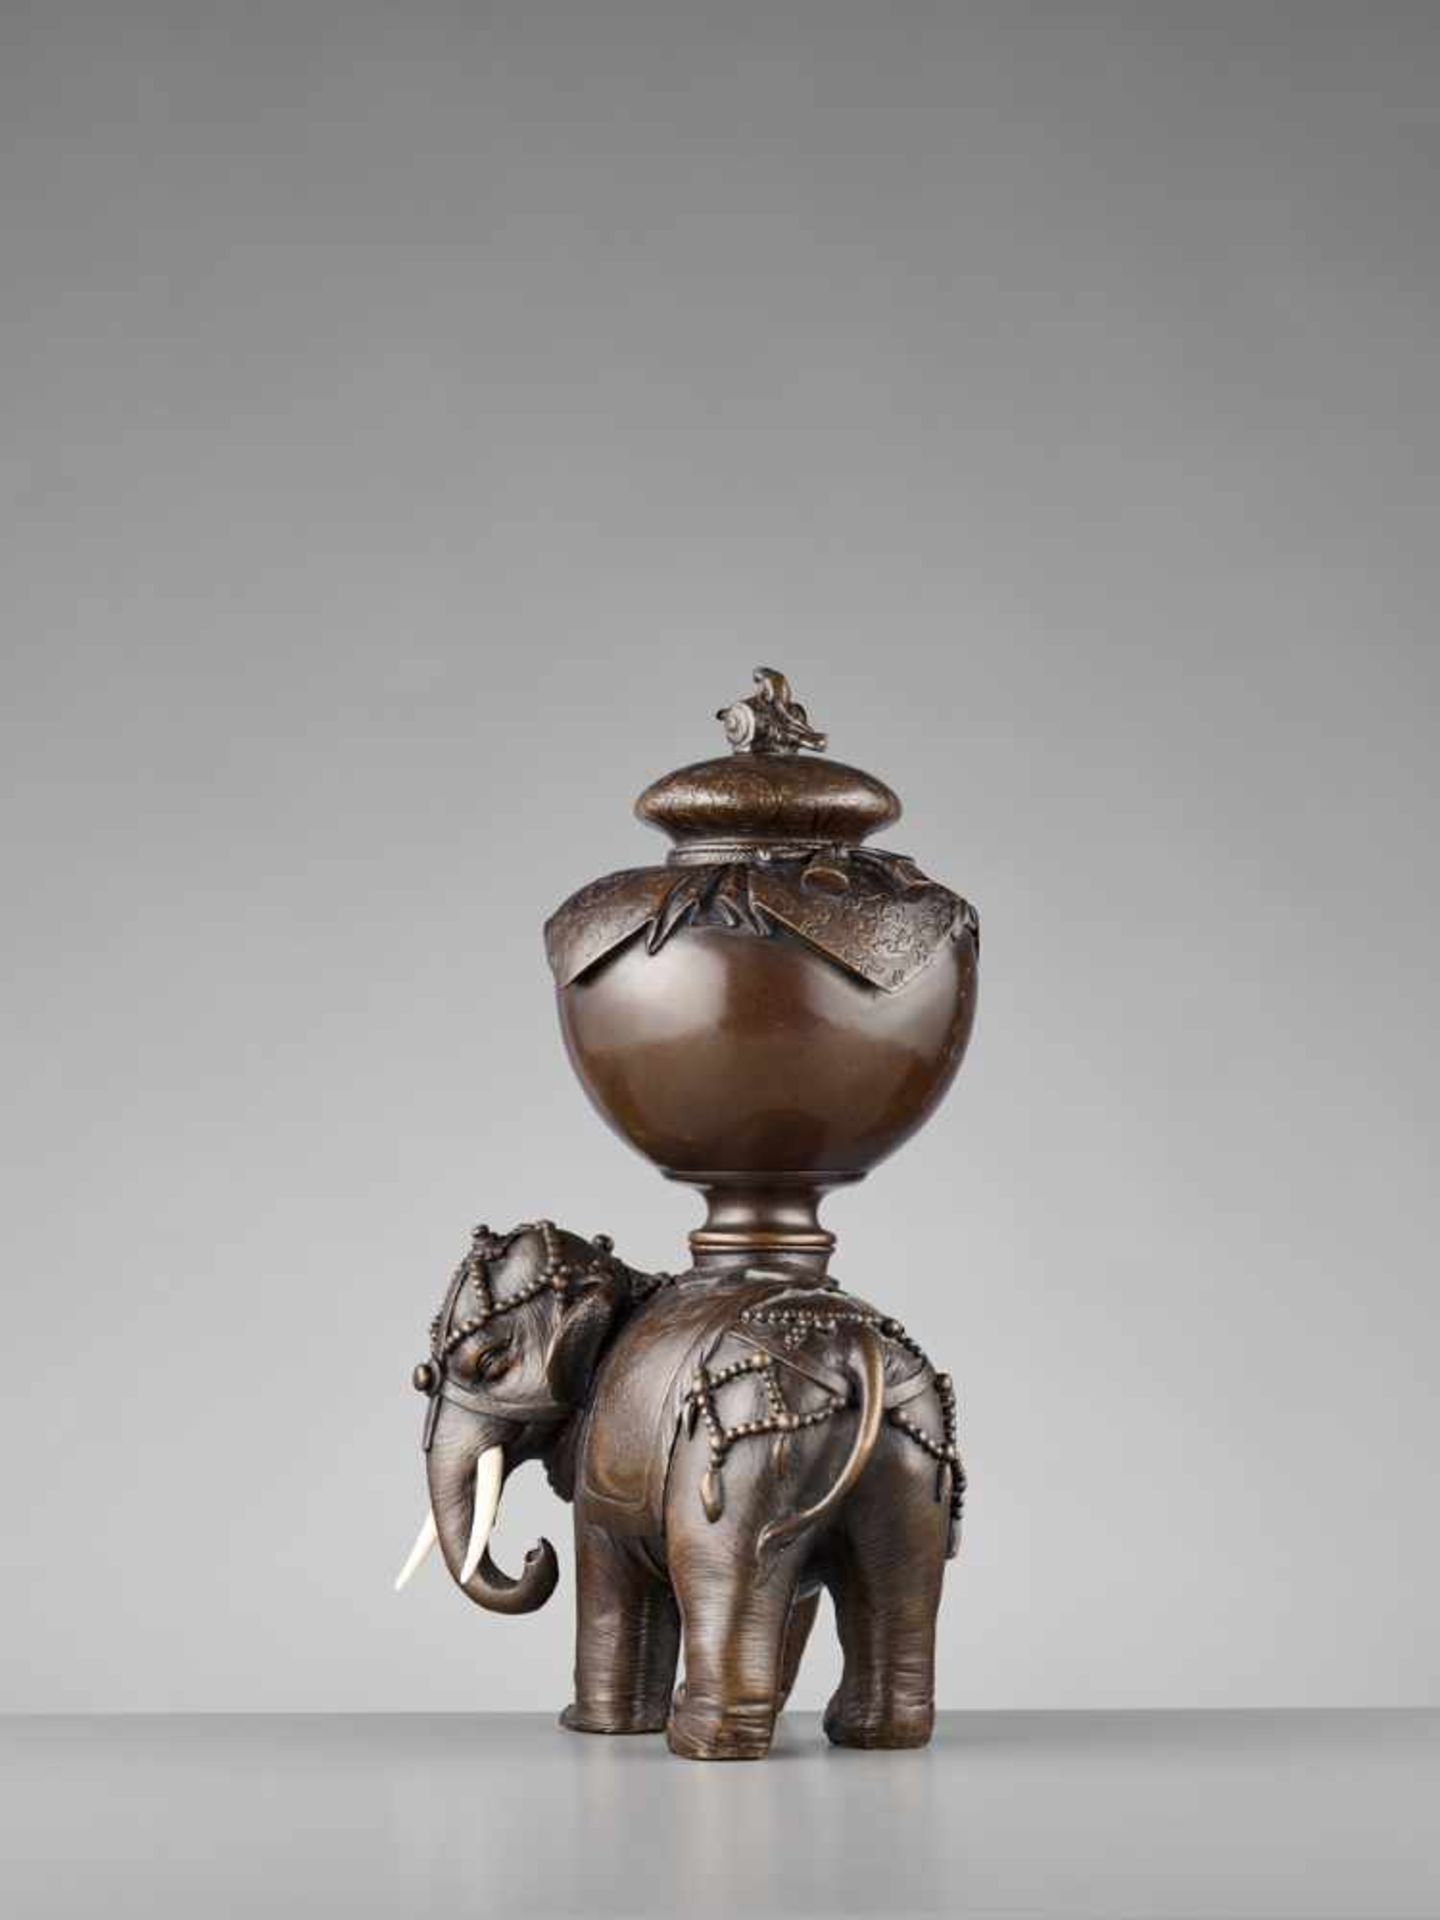 A FINE LARGE CAPARISONED ELEPHANT BRONZE KORO Japan, Meiji period (1868-1912)The pachyderm stands on - Image 3 of 10